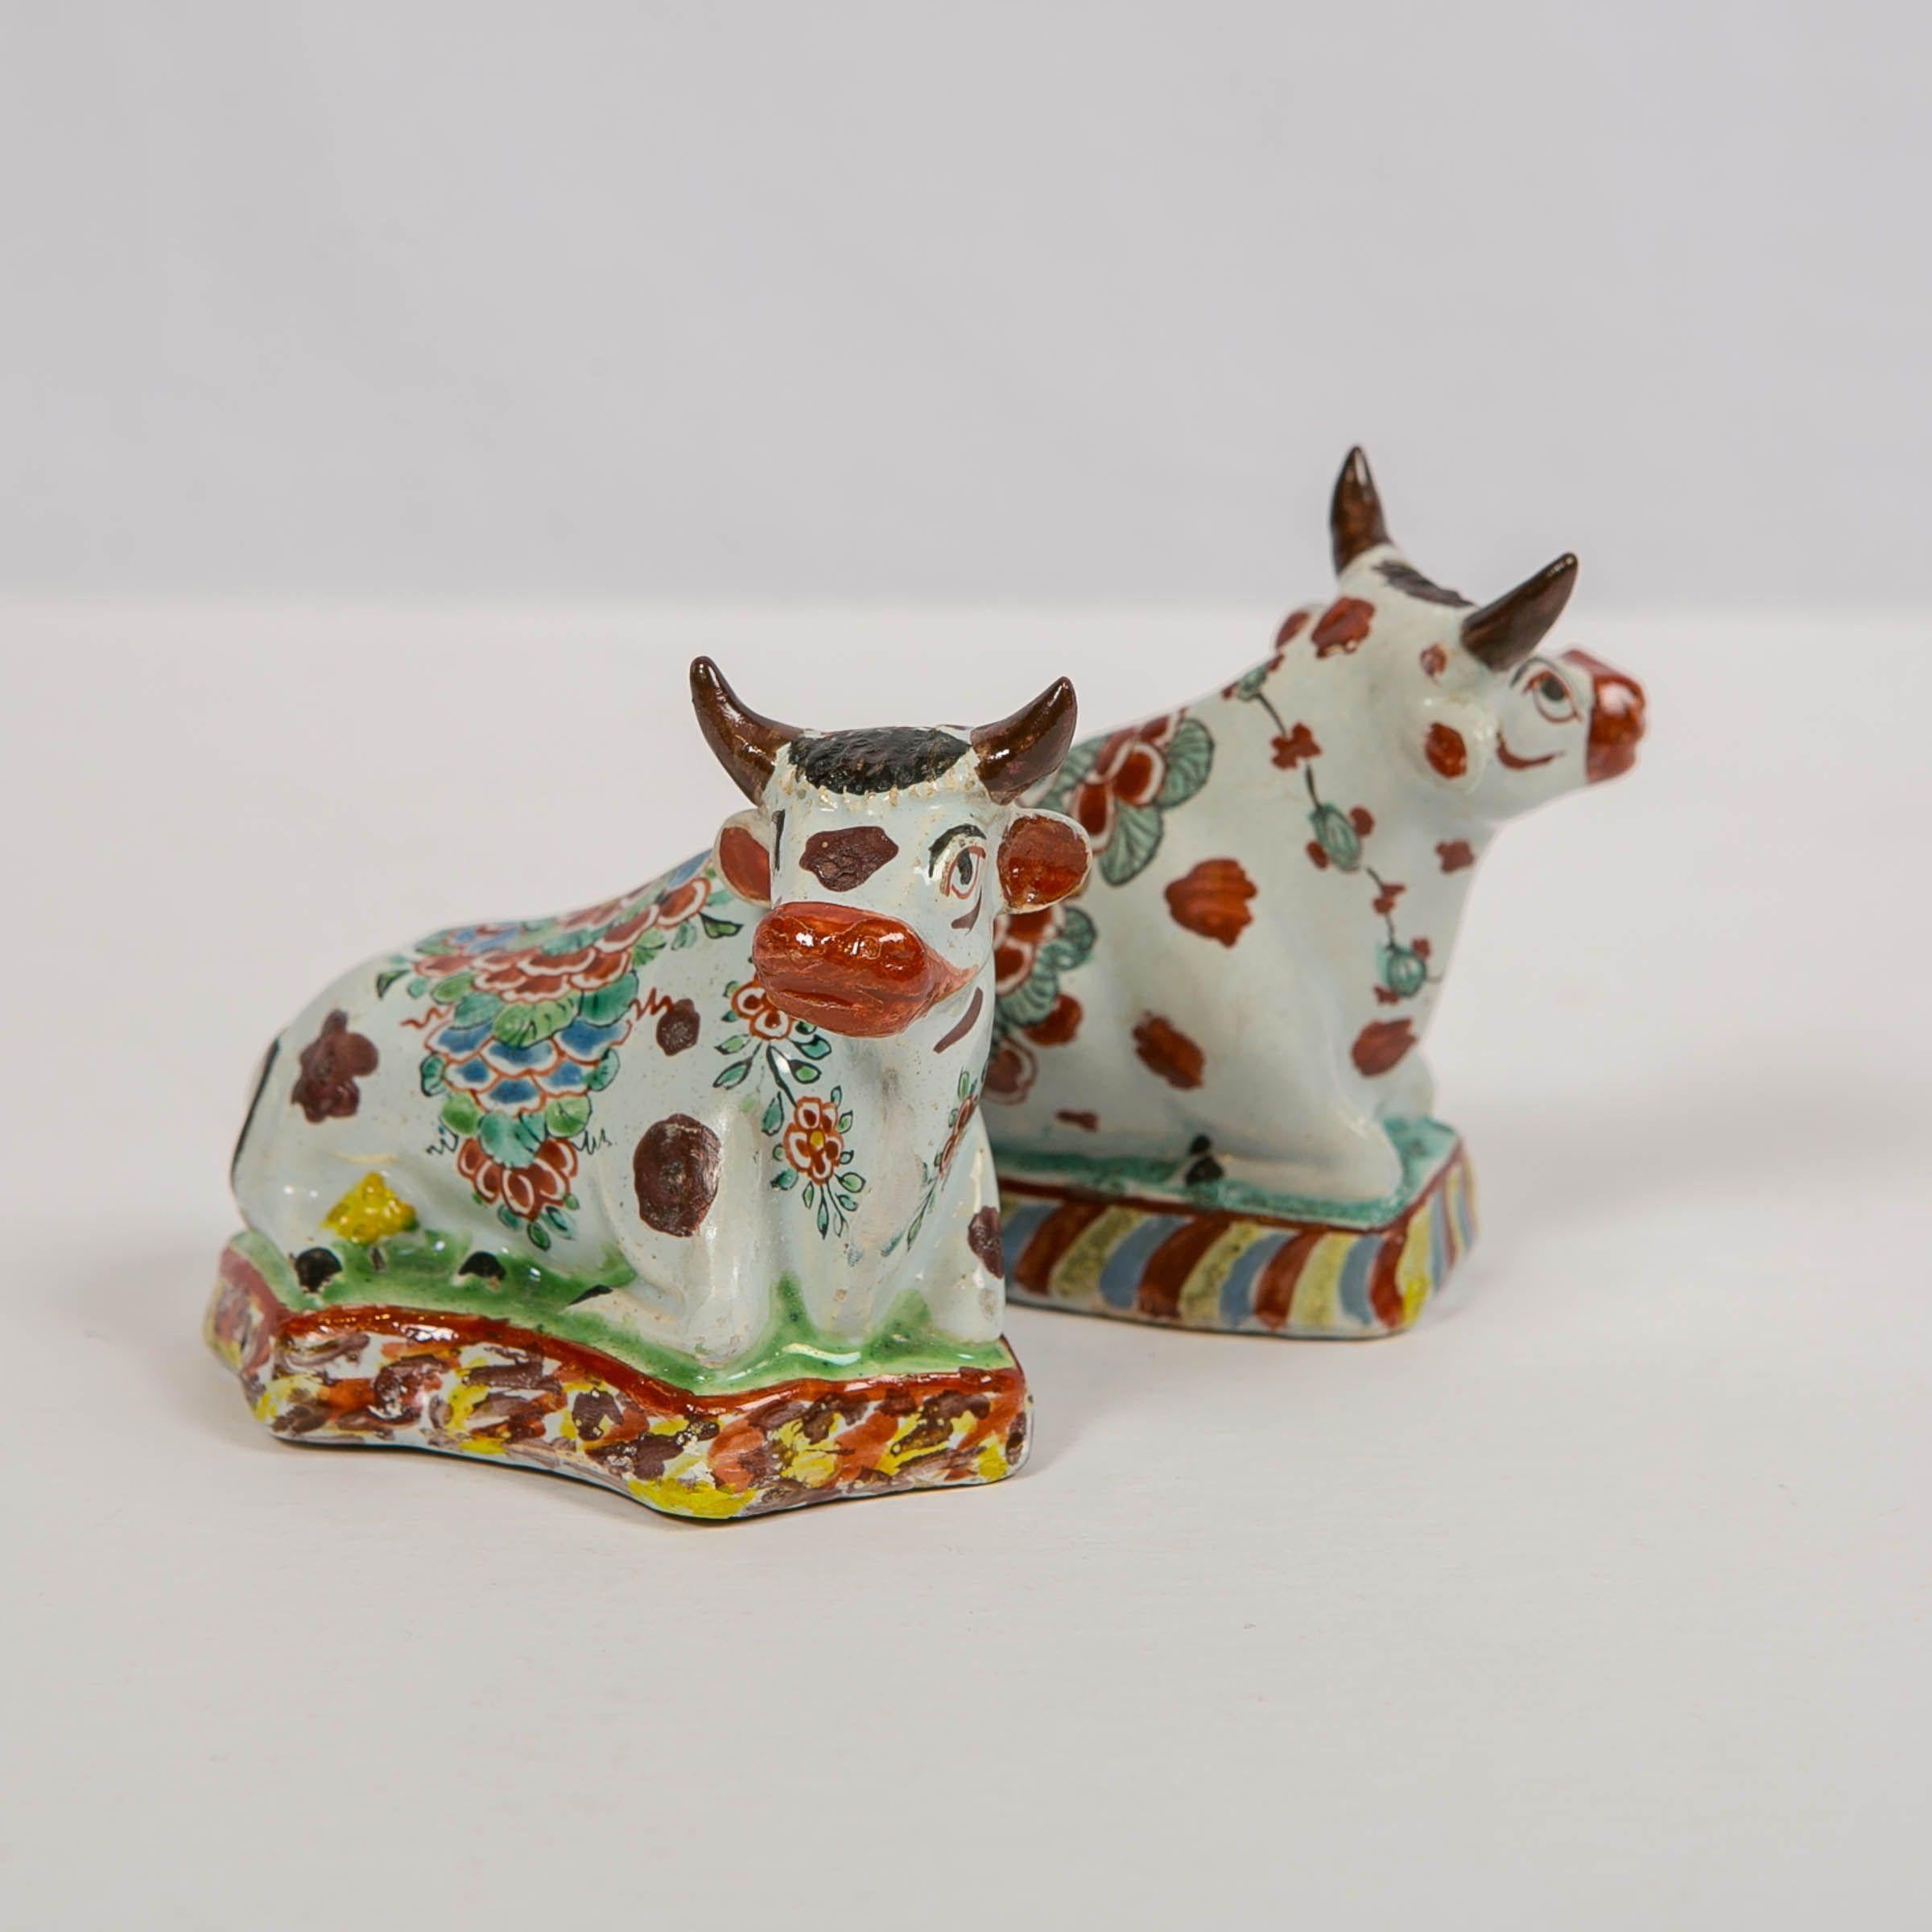 18th Century Pair of Dutch Delft Cows Painted in Polychrome Petit Feu Colors Made circa 1760